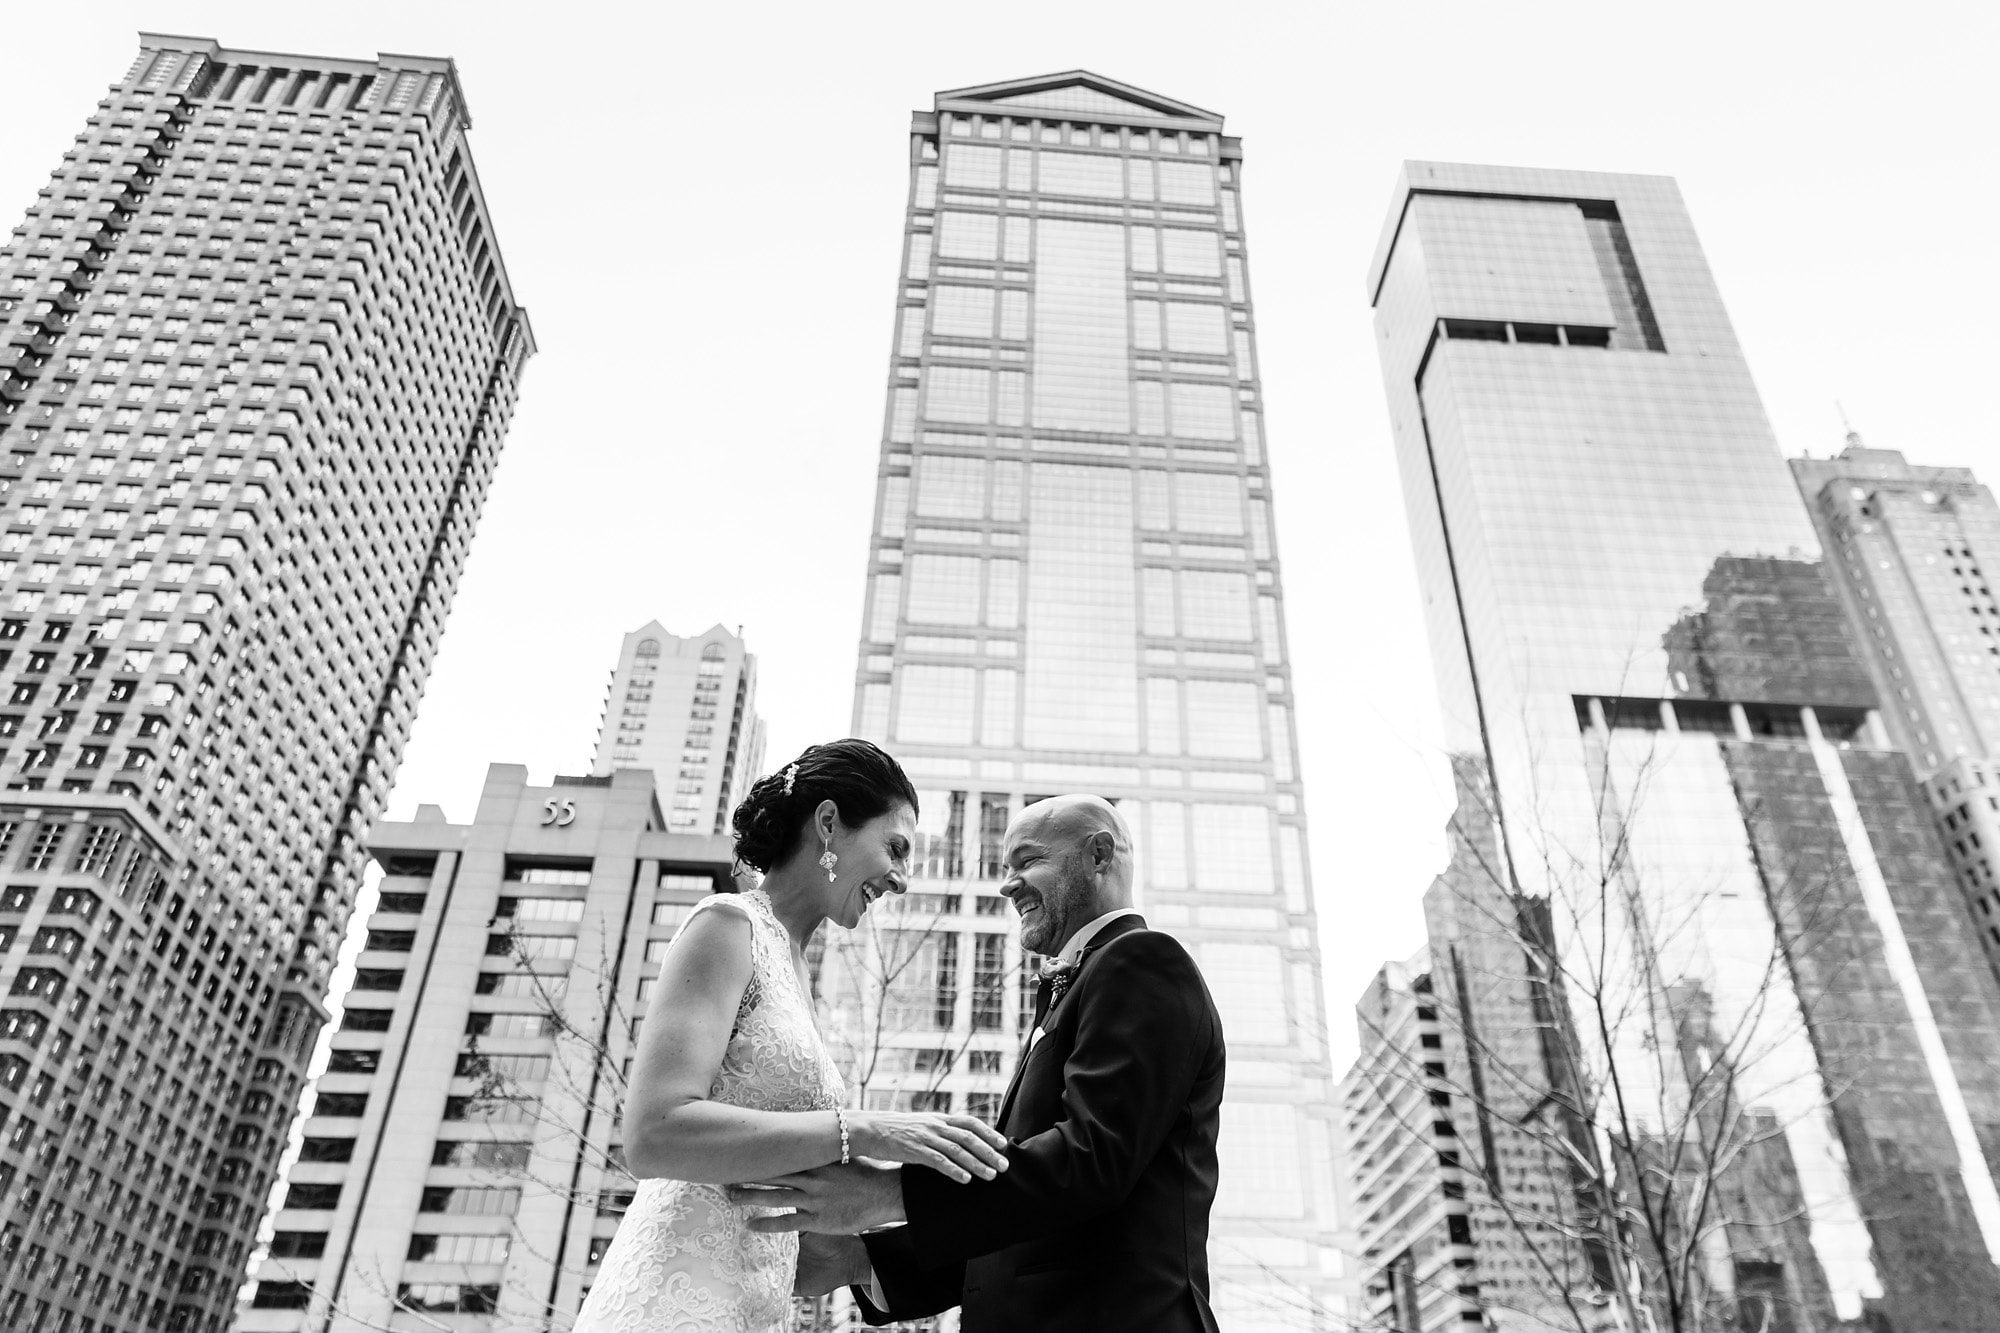 Christina and Brad see each other for the first time on their wedding day outside the Westin Chicago River North